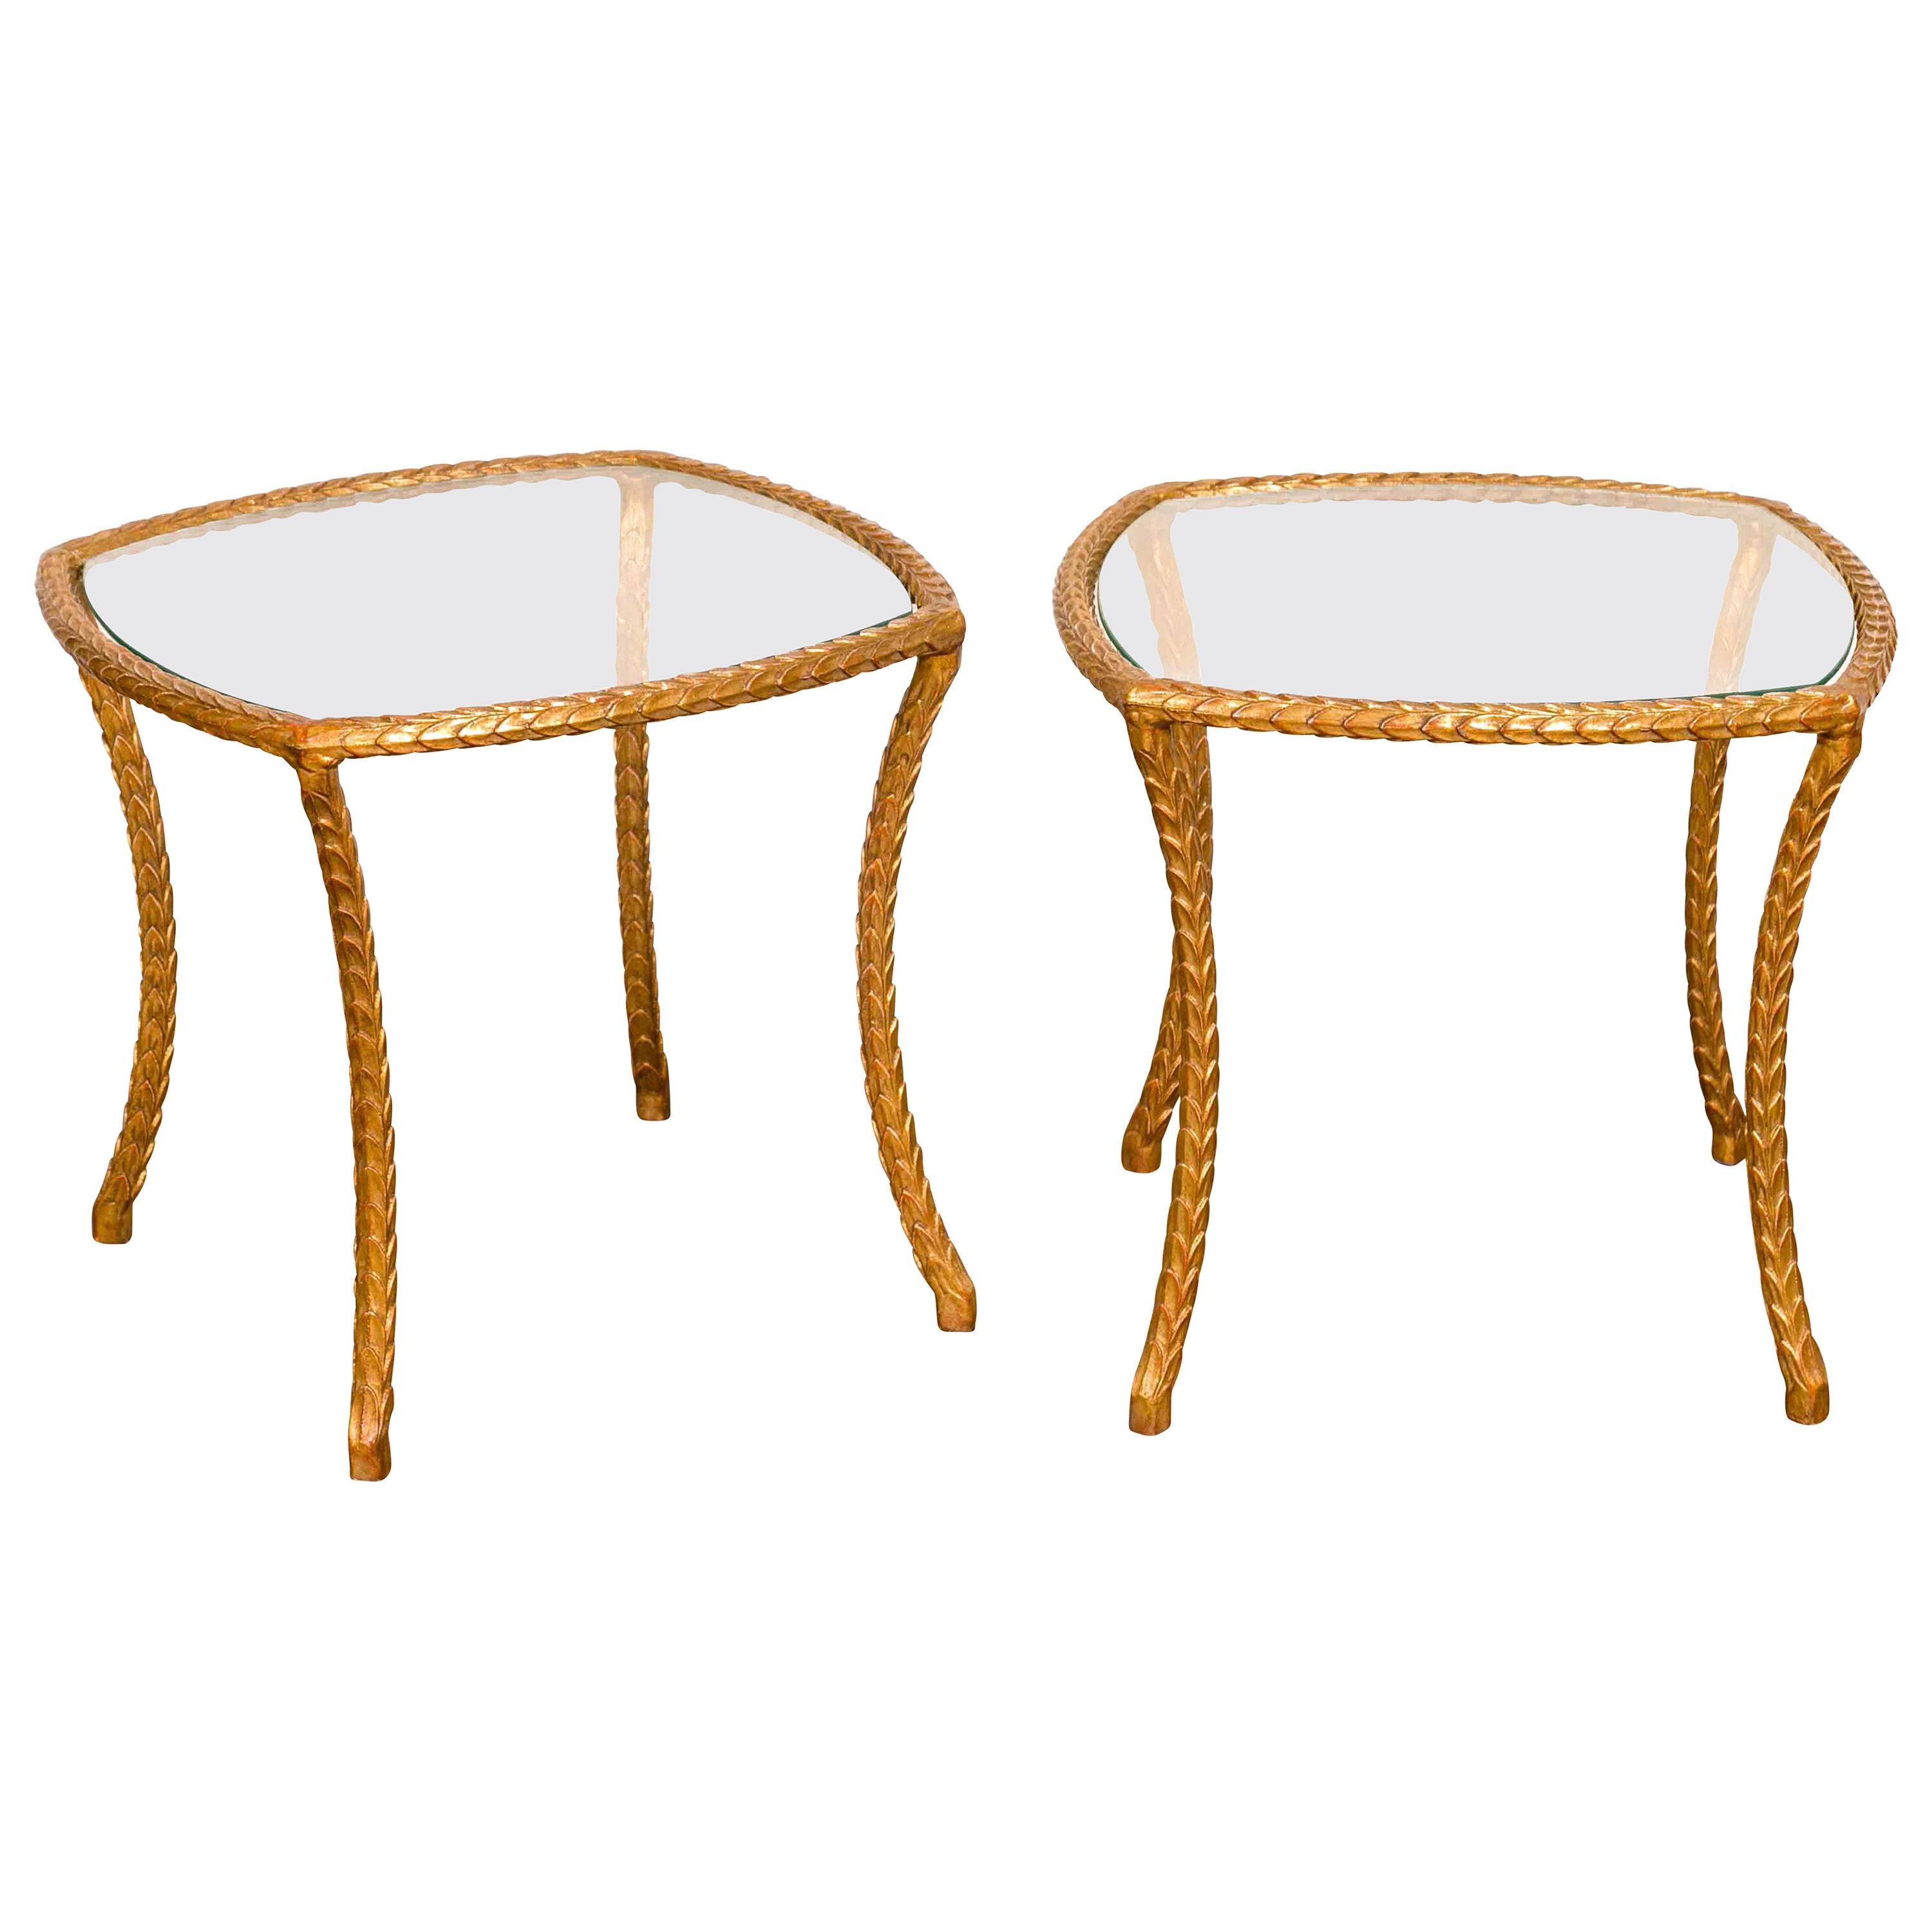 Pair of Midcentury French Maison Baguès Style Gilt Bronze Tables with Glass Tops